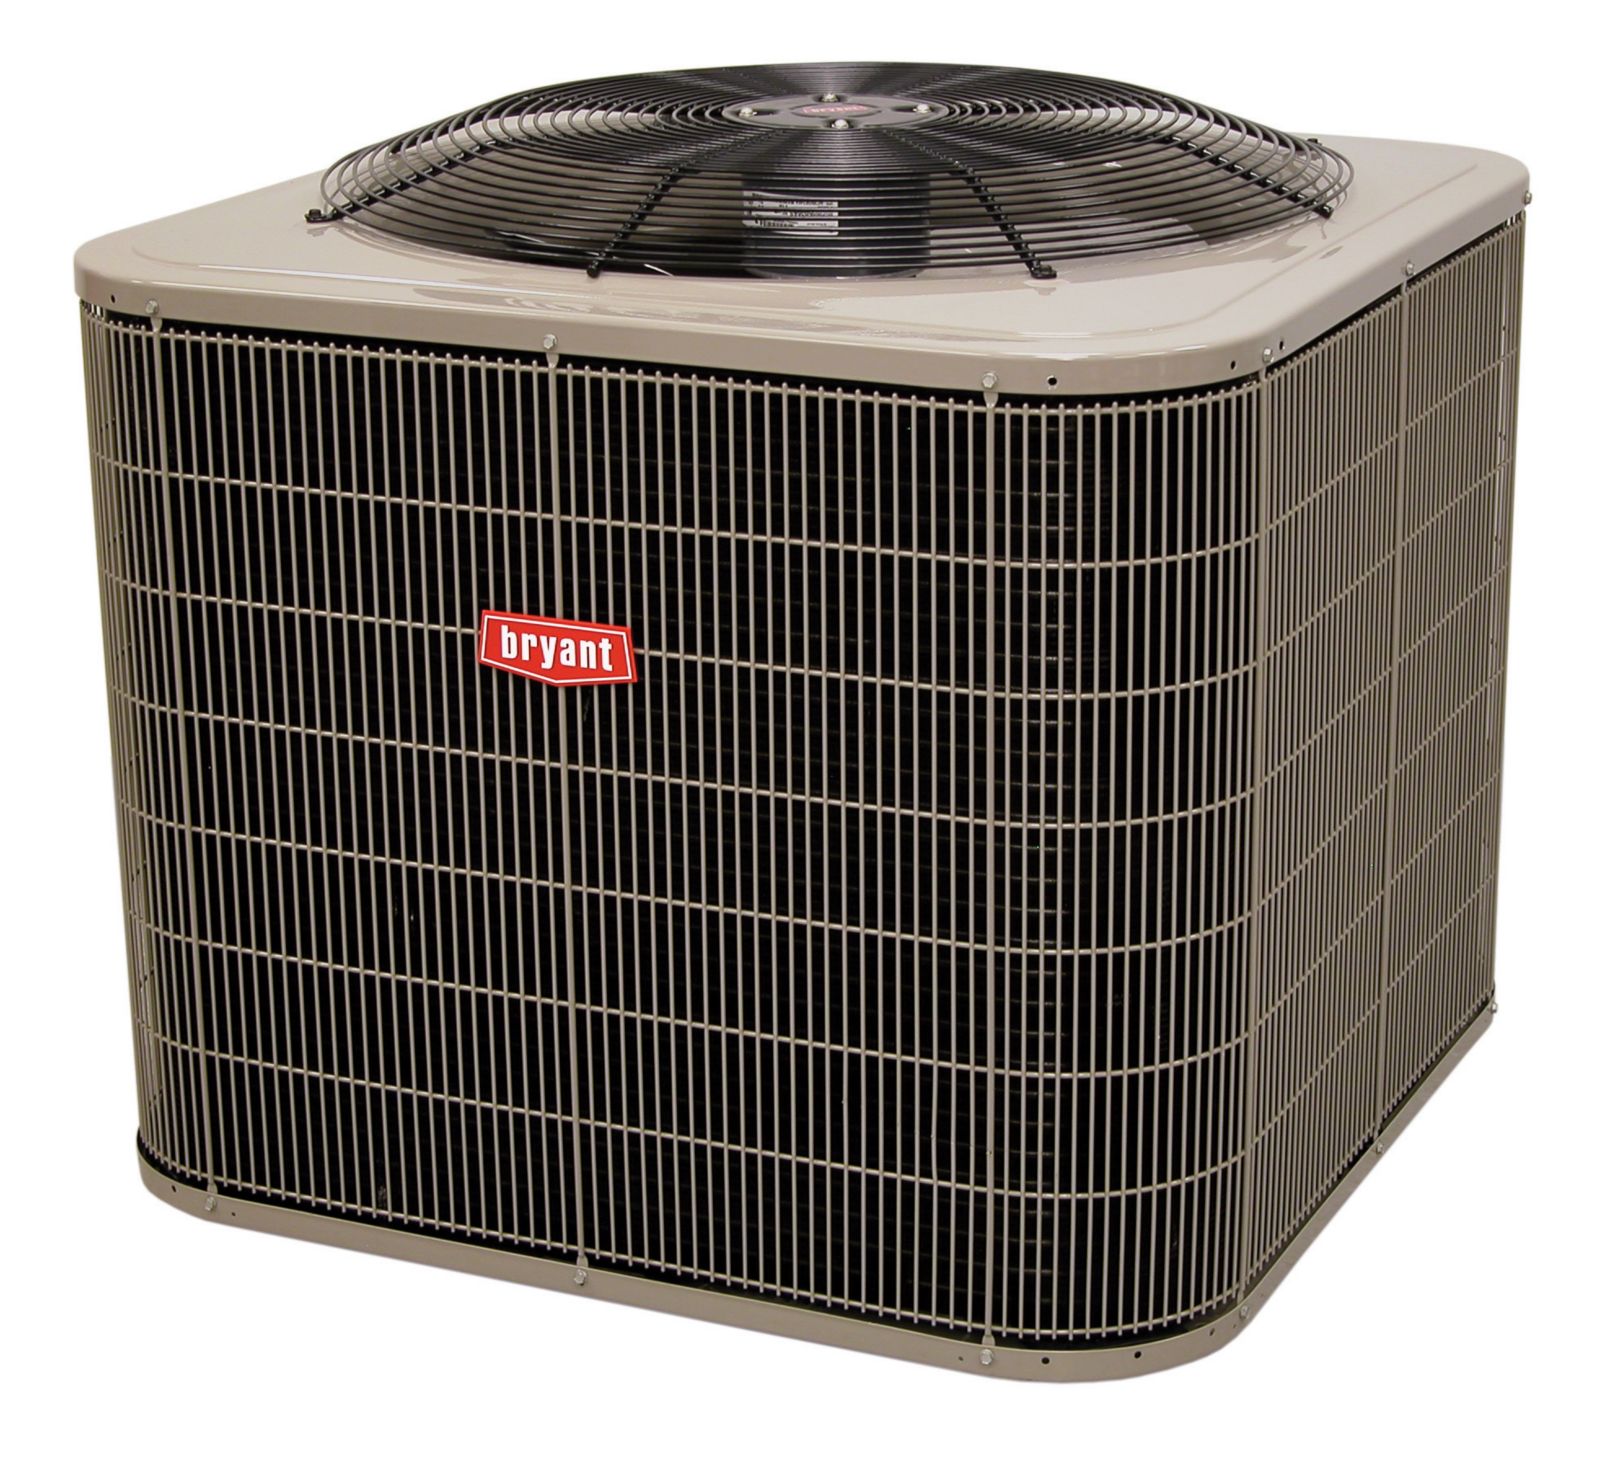 Heating, ventilation and air conditioning